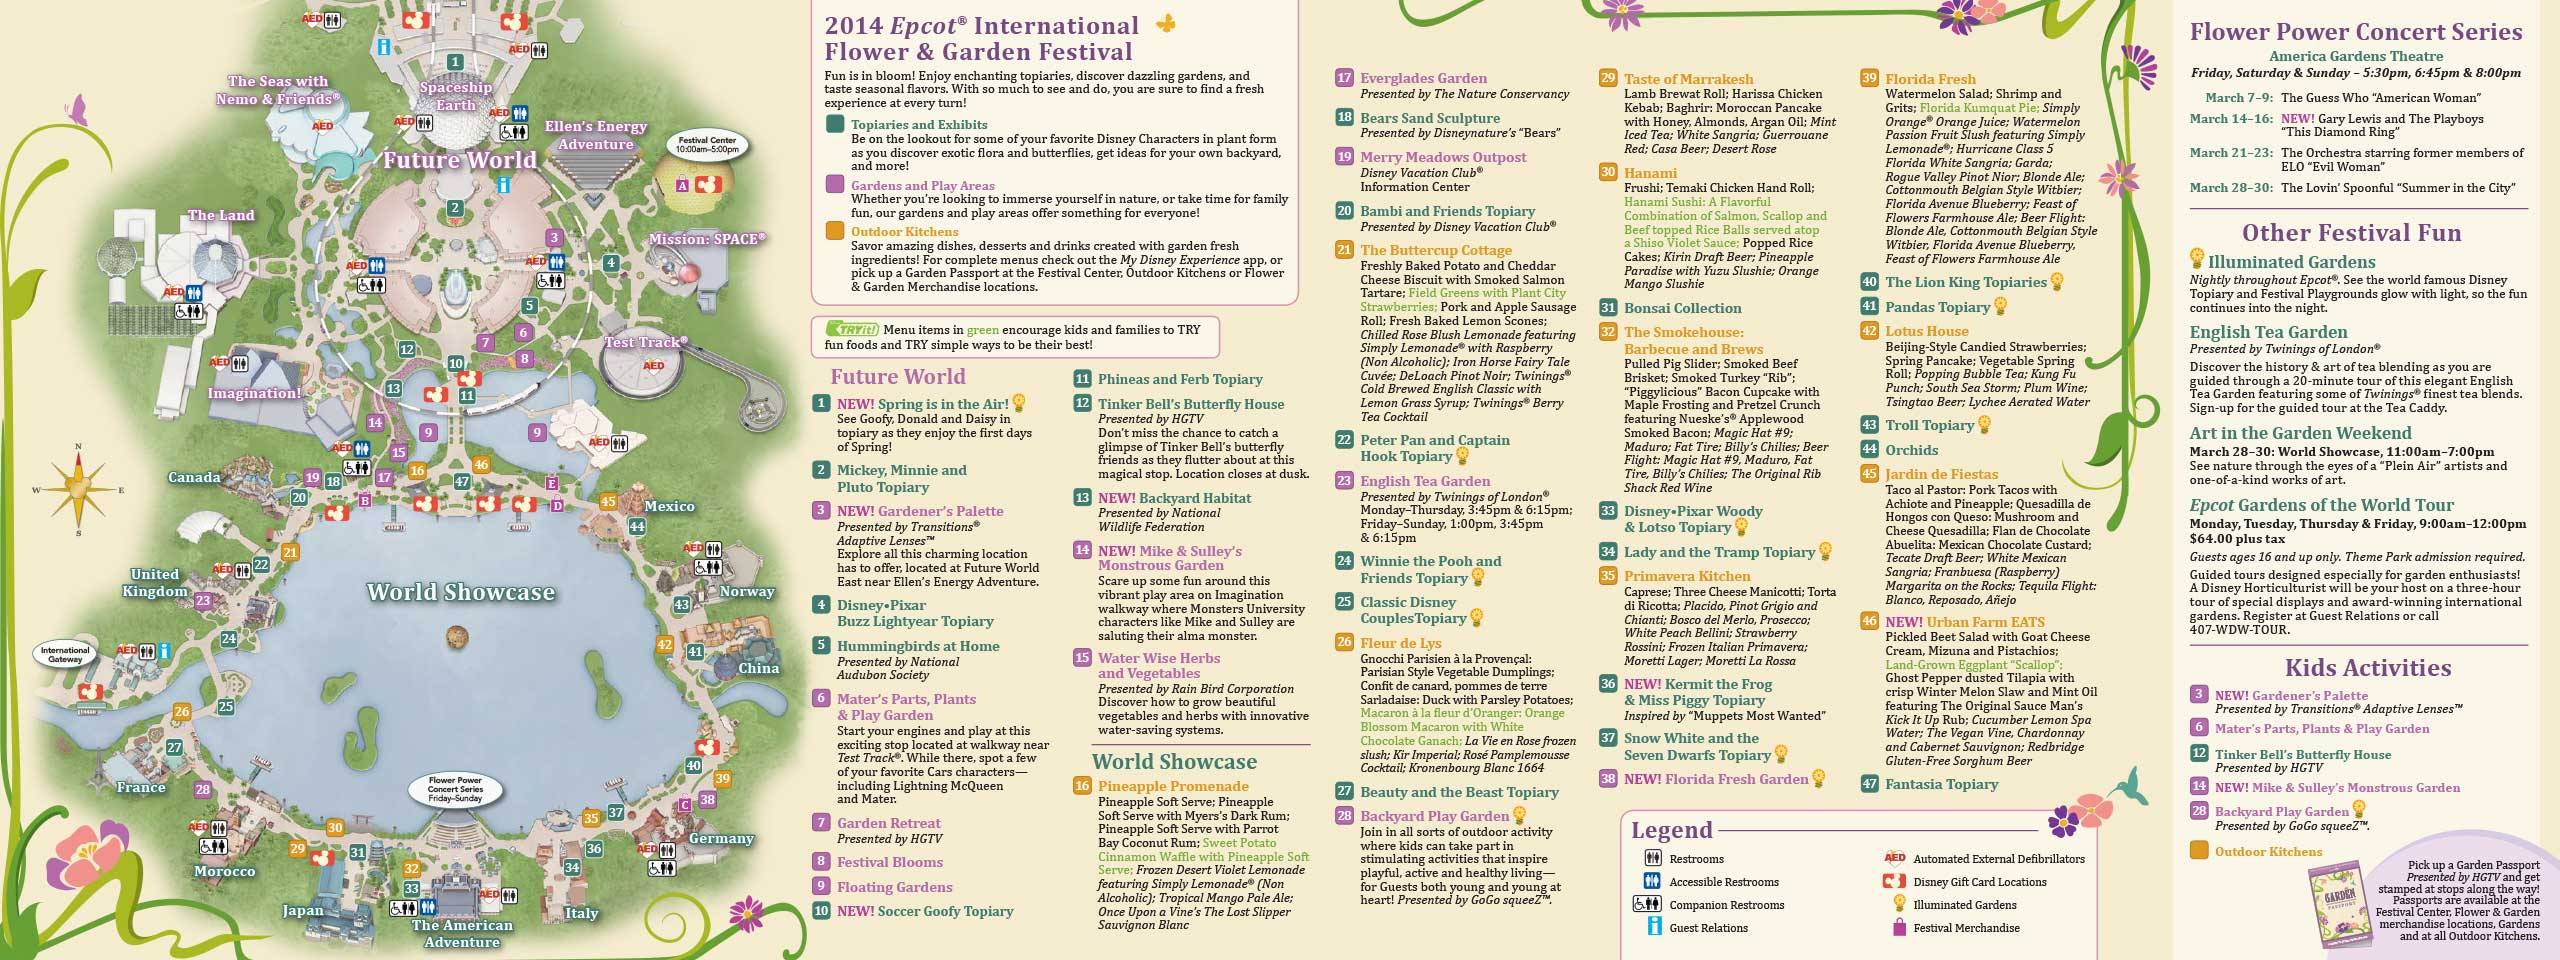 PHOTOS - Guide map now available for the 2014 Epcot Flower and Garden Festival